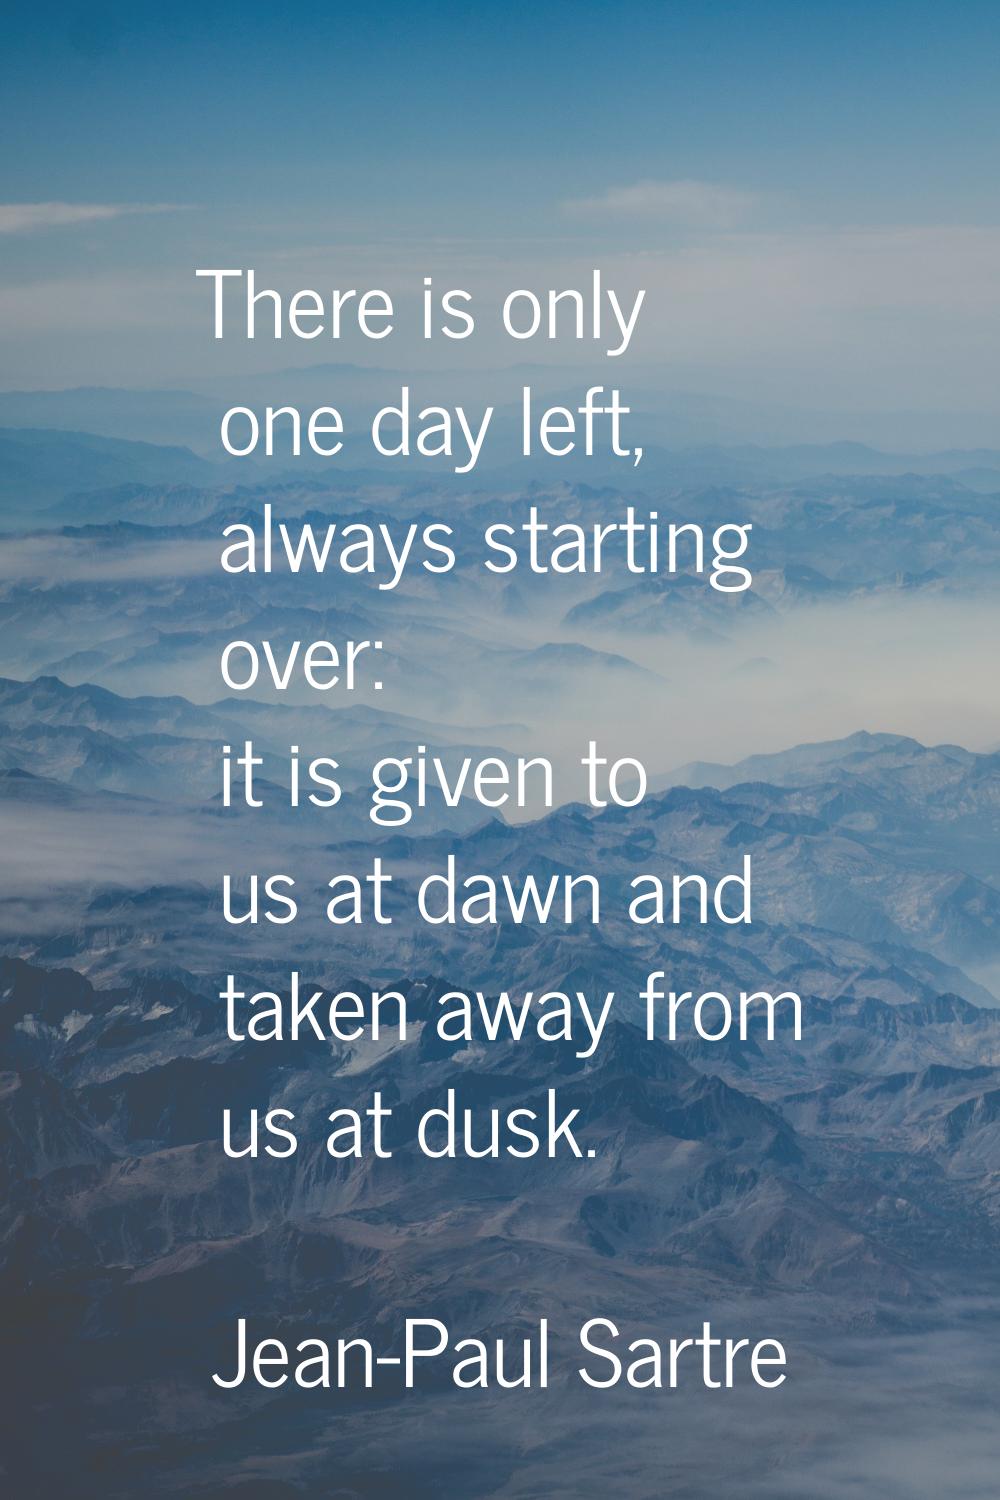 There is only one day left, always starting over: it is given to us at dawn and taken away from us 